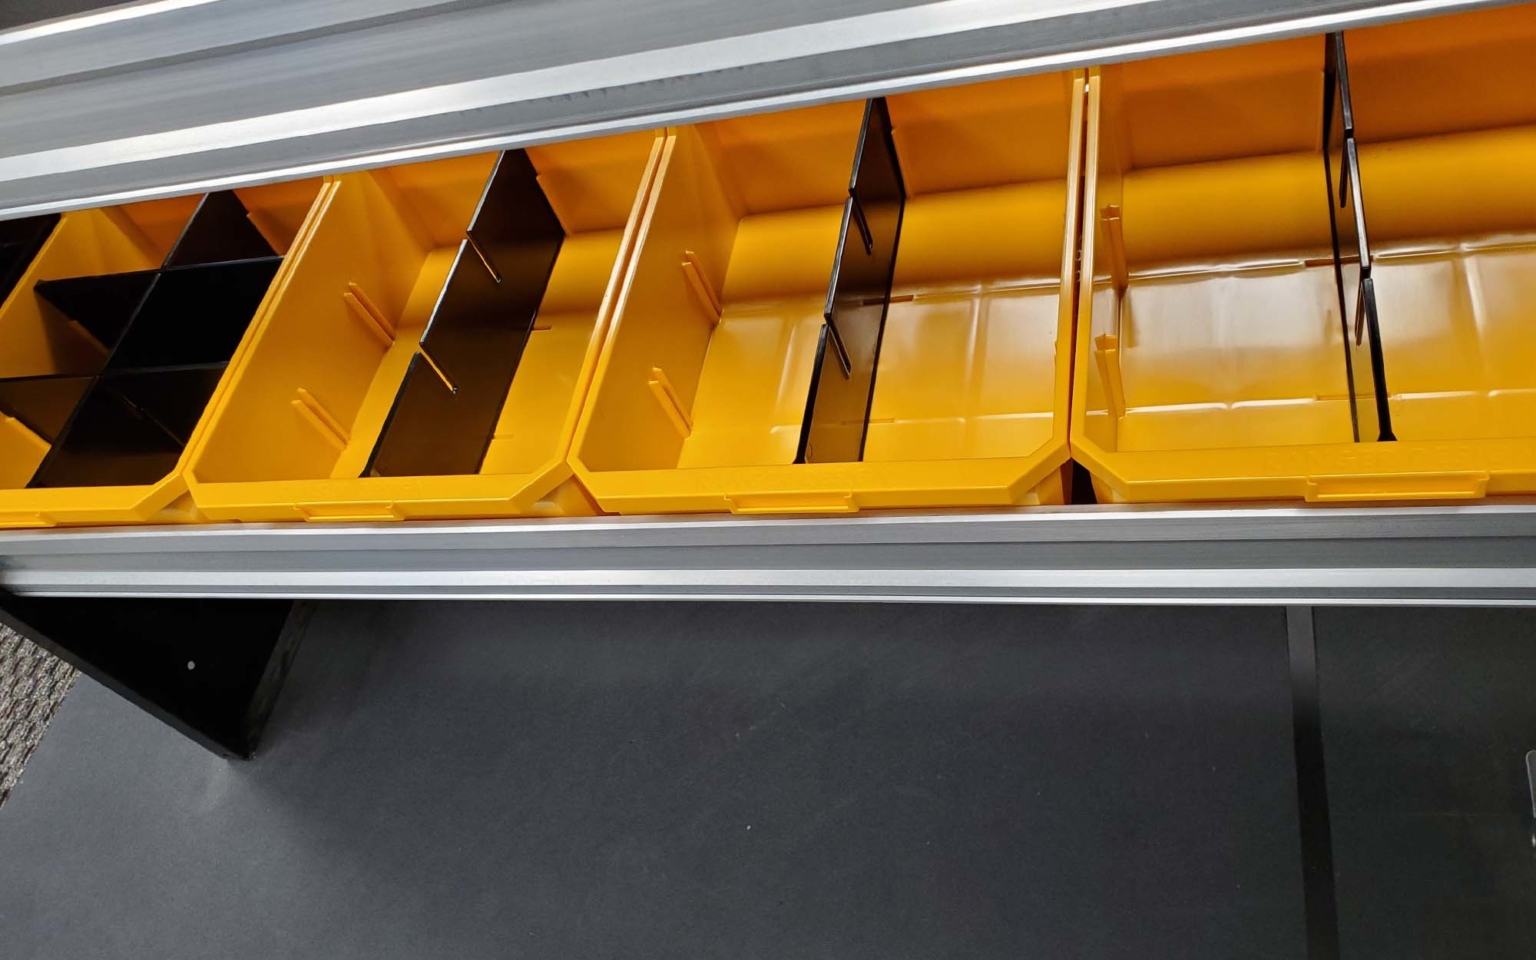 Yellow shelf bins with dividers